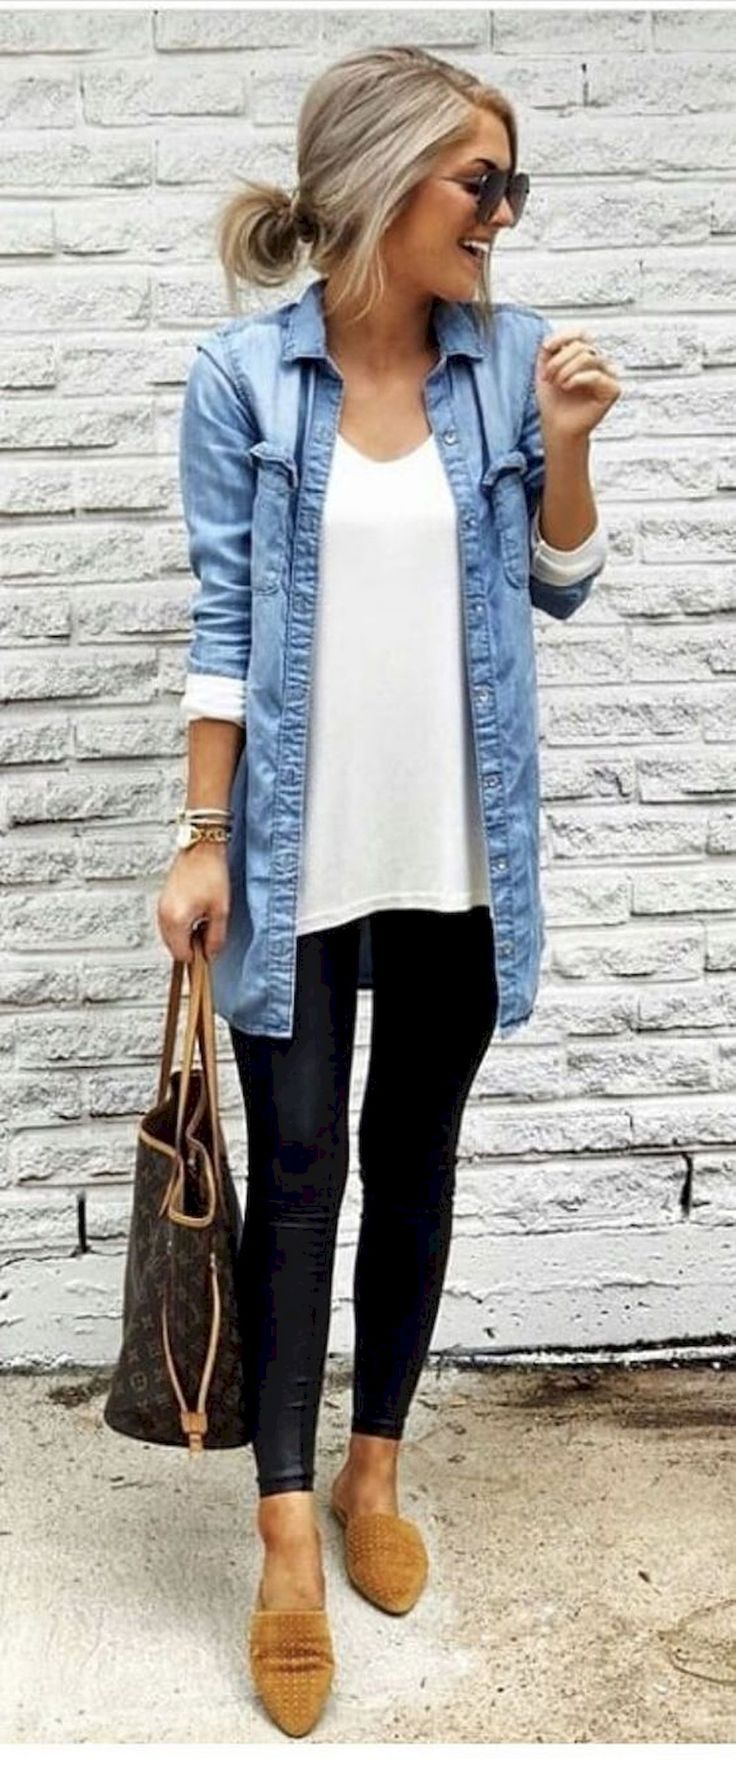 50 Best Spring Outfits Casual 2019 for Women - Fashion and Lifestyle - 50 Best Spring Outfits Casual 2019 for Women - Fashion and Lifestyle -   16 style Women spring ideas